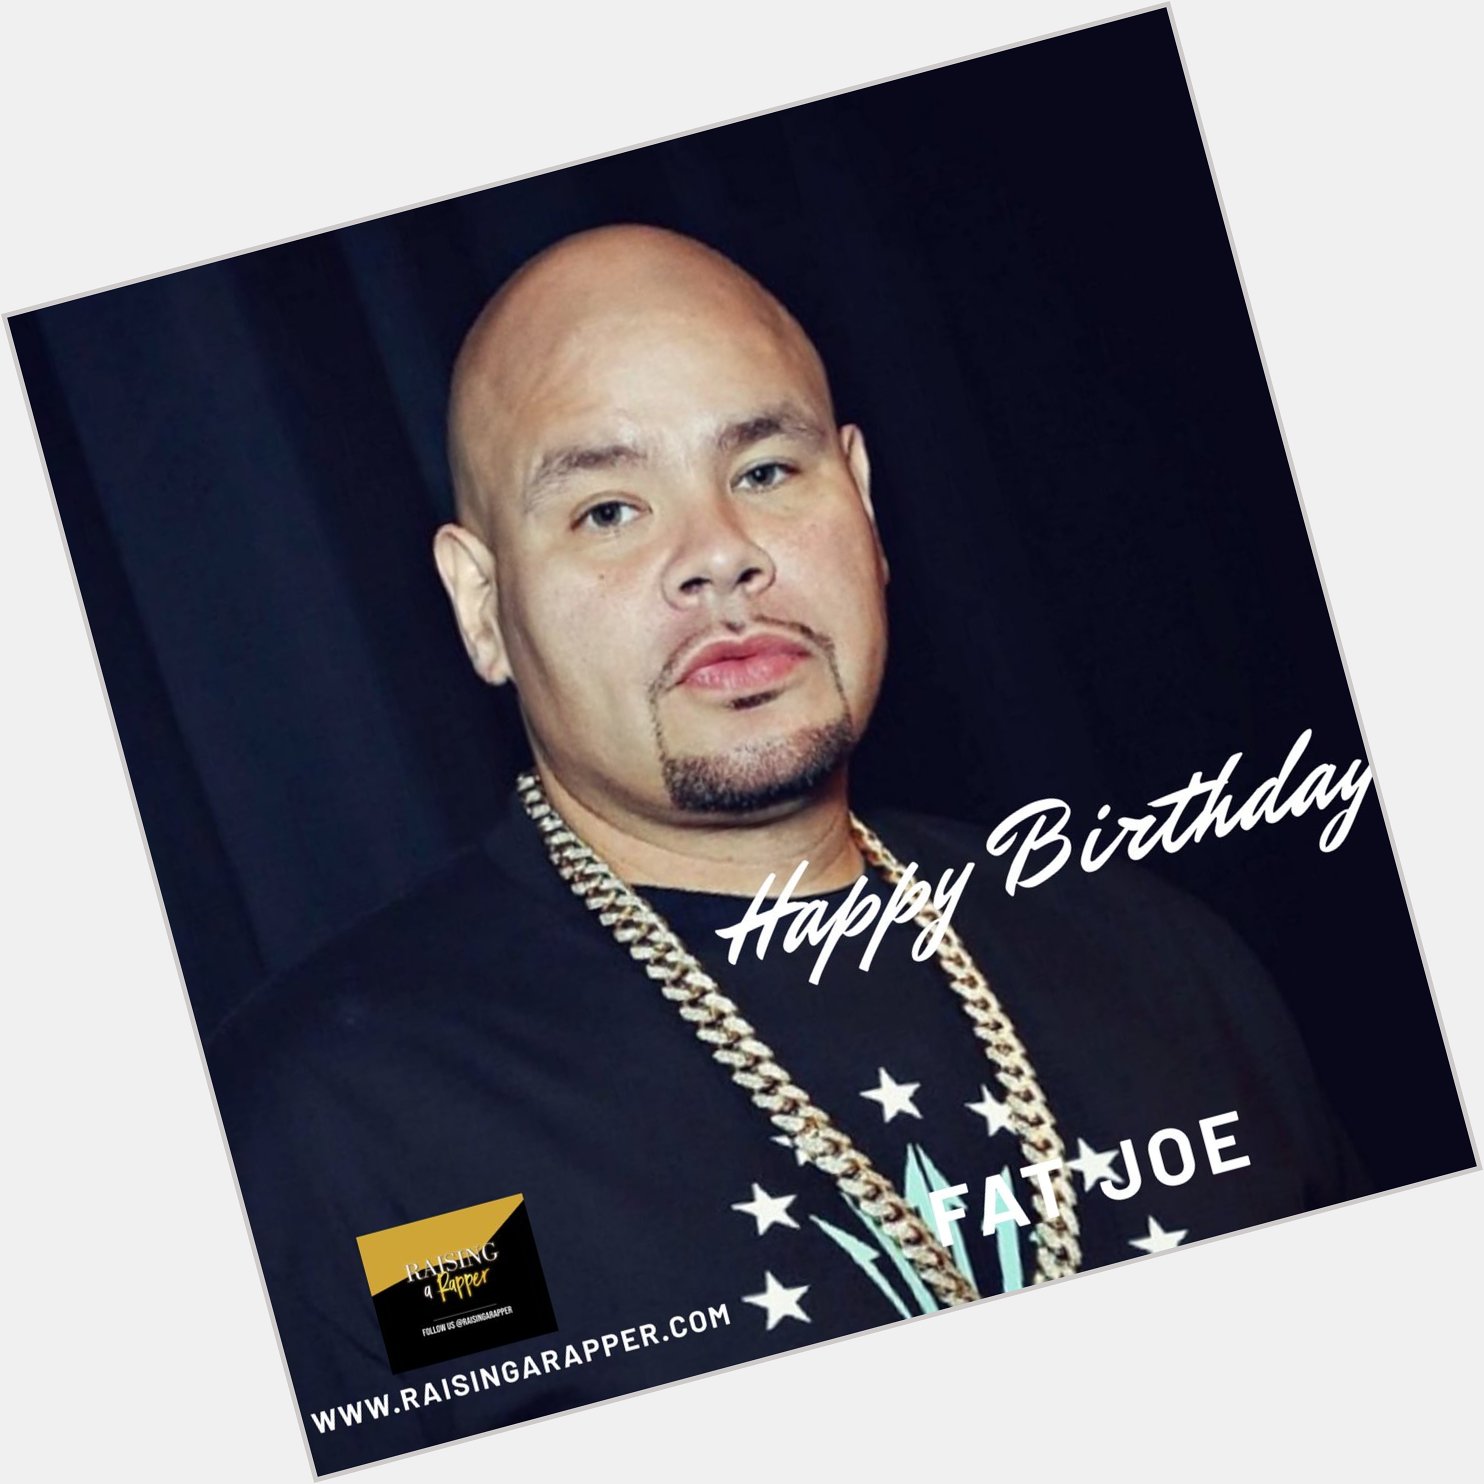  Happy birthday to Rapper and Actor Fat Joe!!!!!   